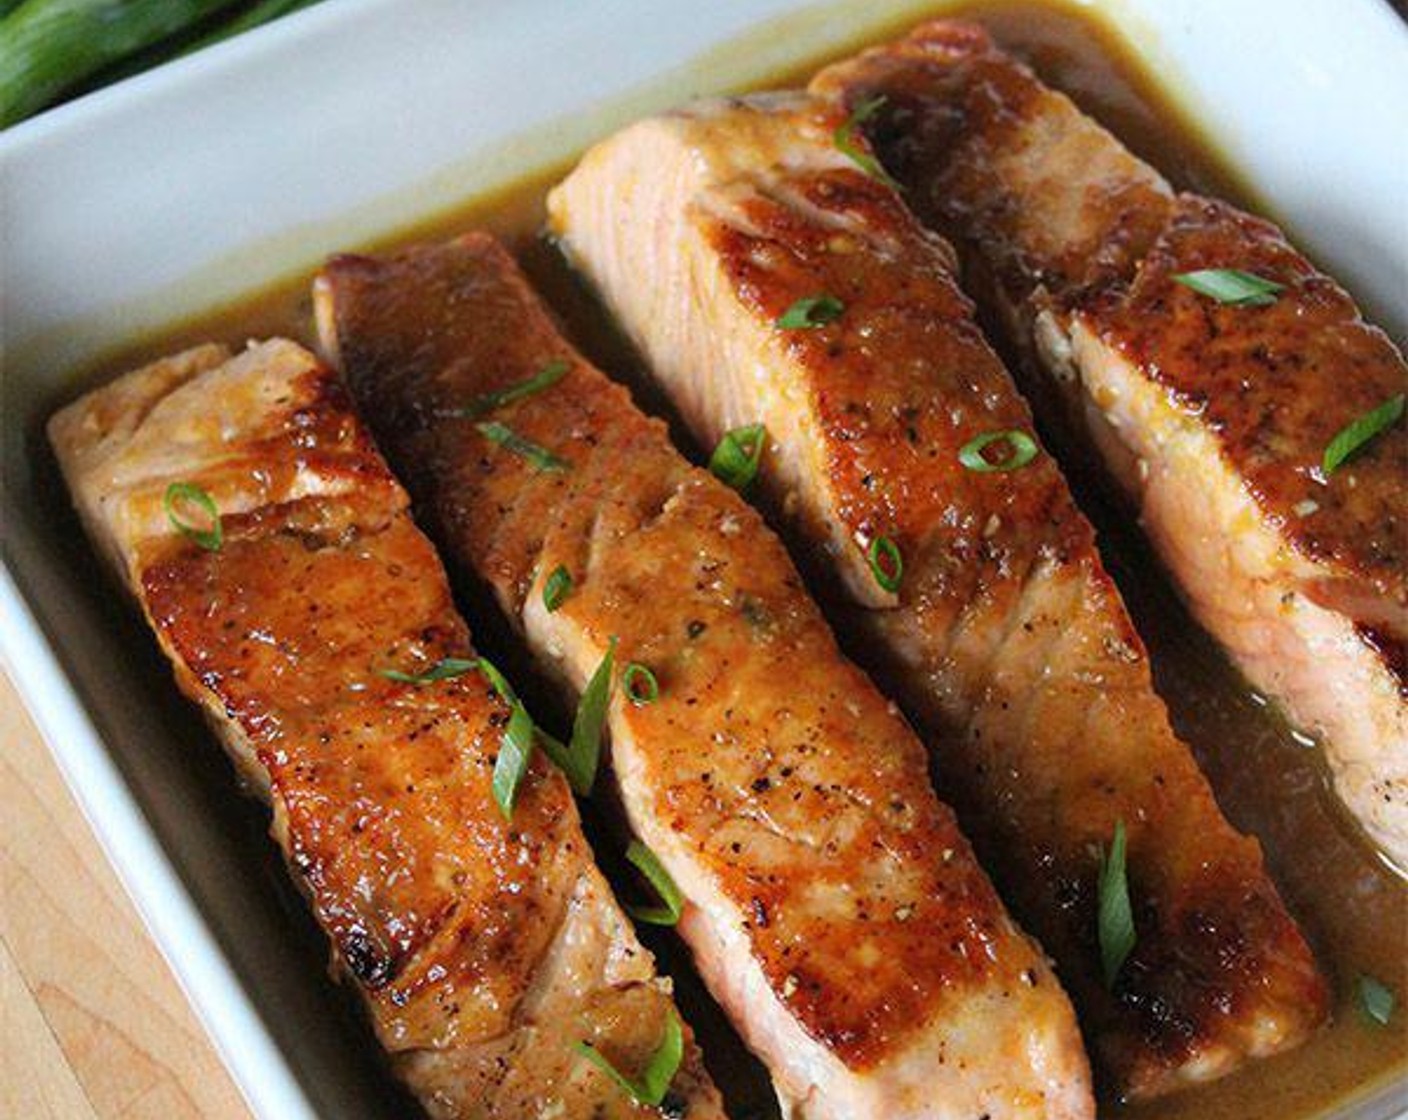 step 6 Transfer to a rimmed plate or serving dish. Pour the glaze over the salmon, making sure to coat the fillets. Sprinkle with the Scallions (to taste) if using and serve hot.